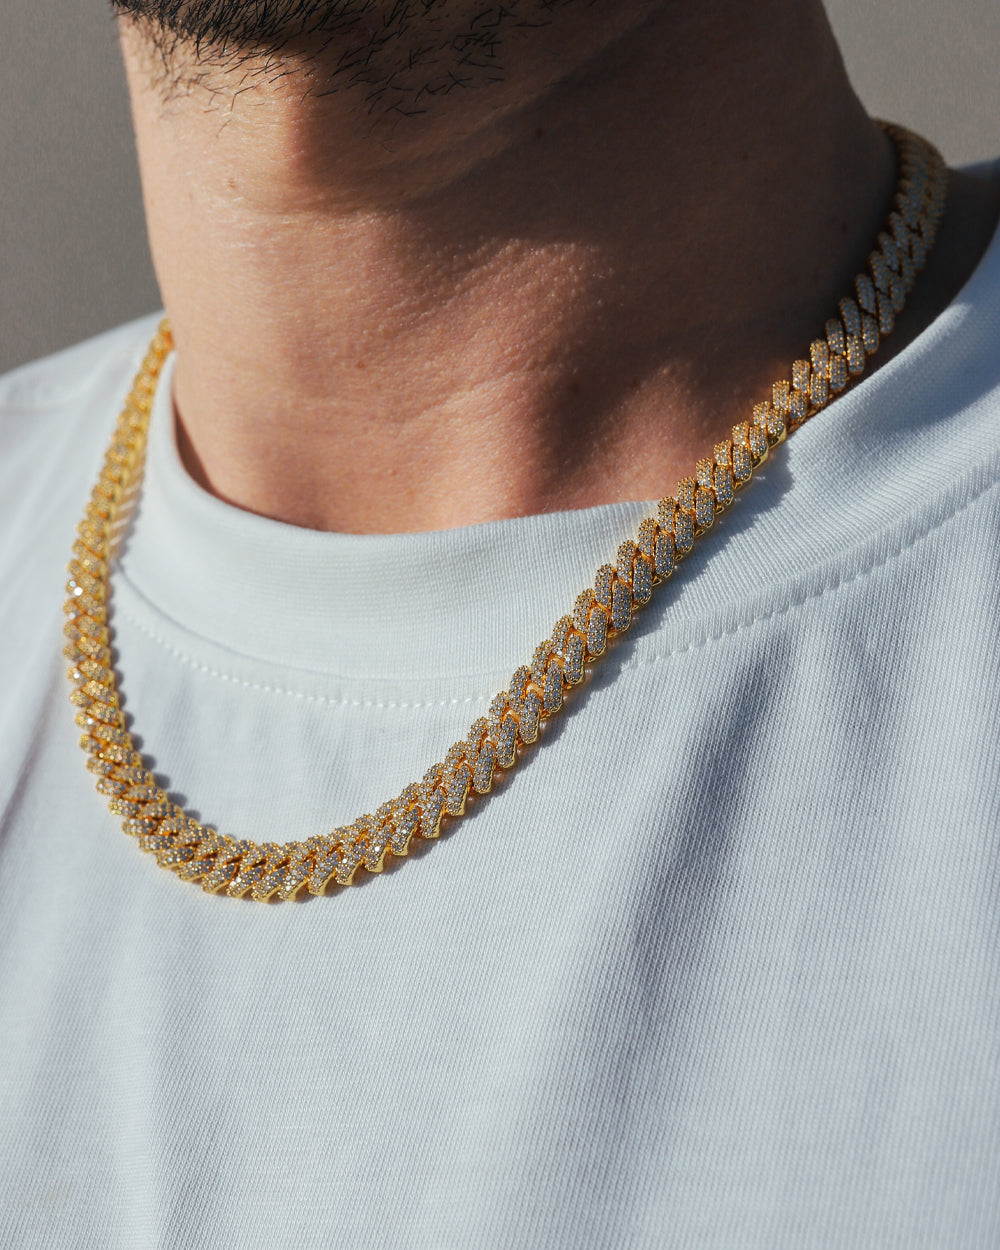 PRONG CHAIN. - 9MM 18K GOLD